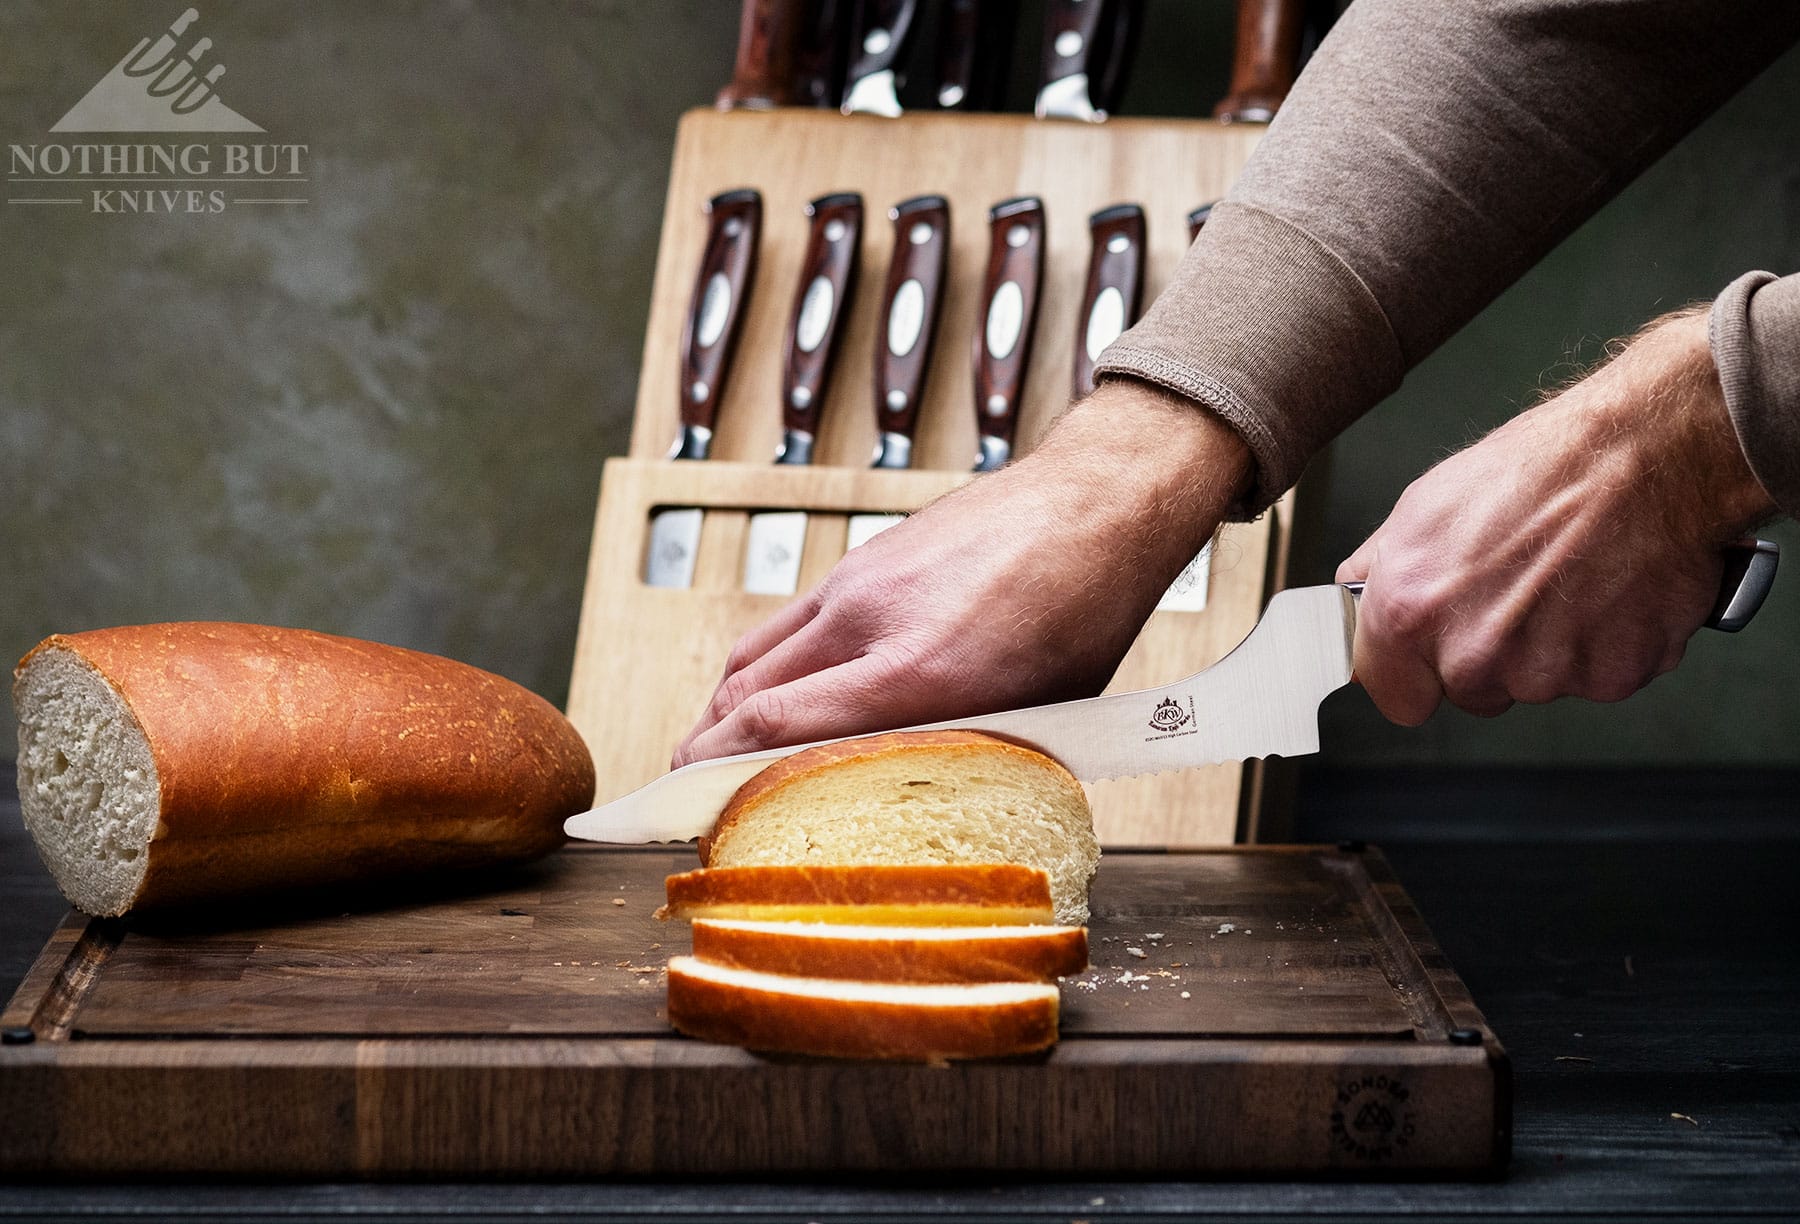 Slicing a loaf of French bread with the Bavarian Knifeworks bread knife.